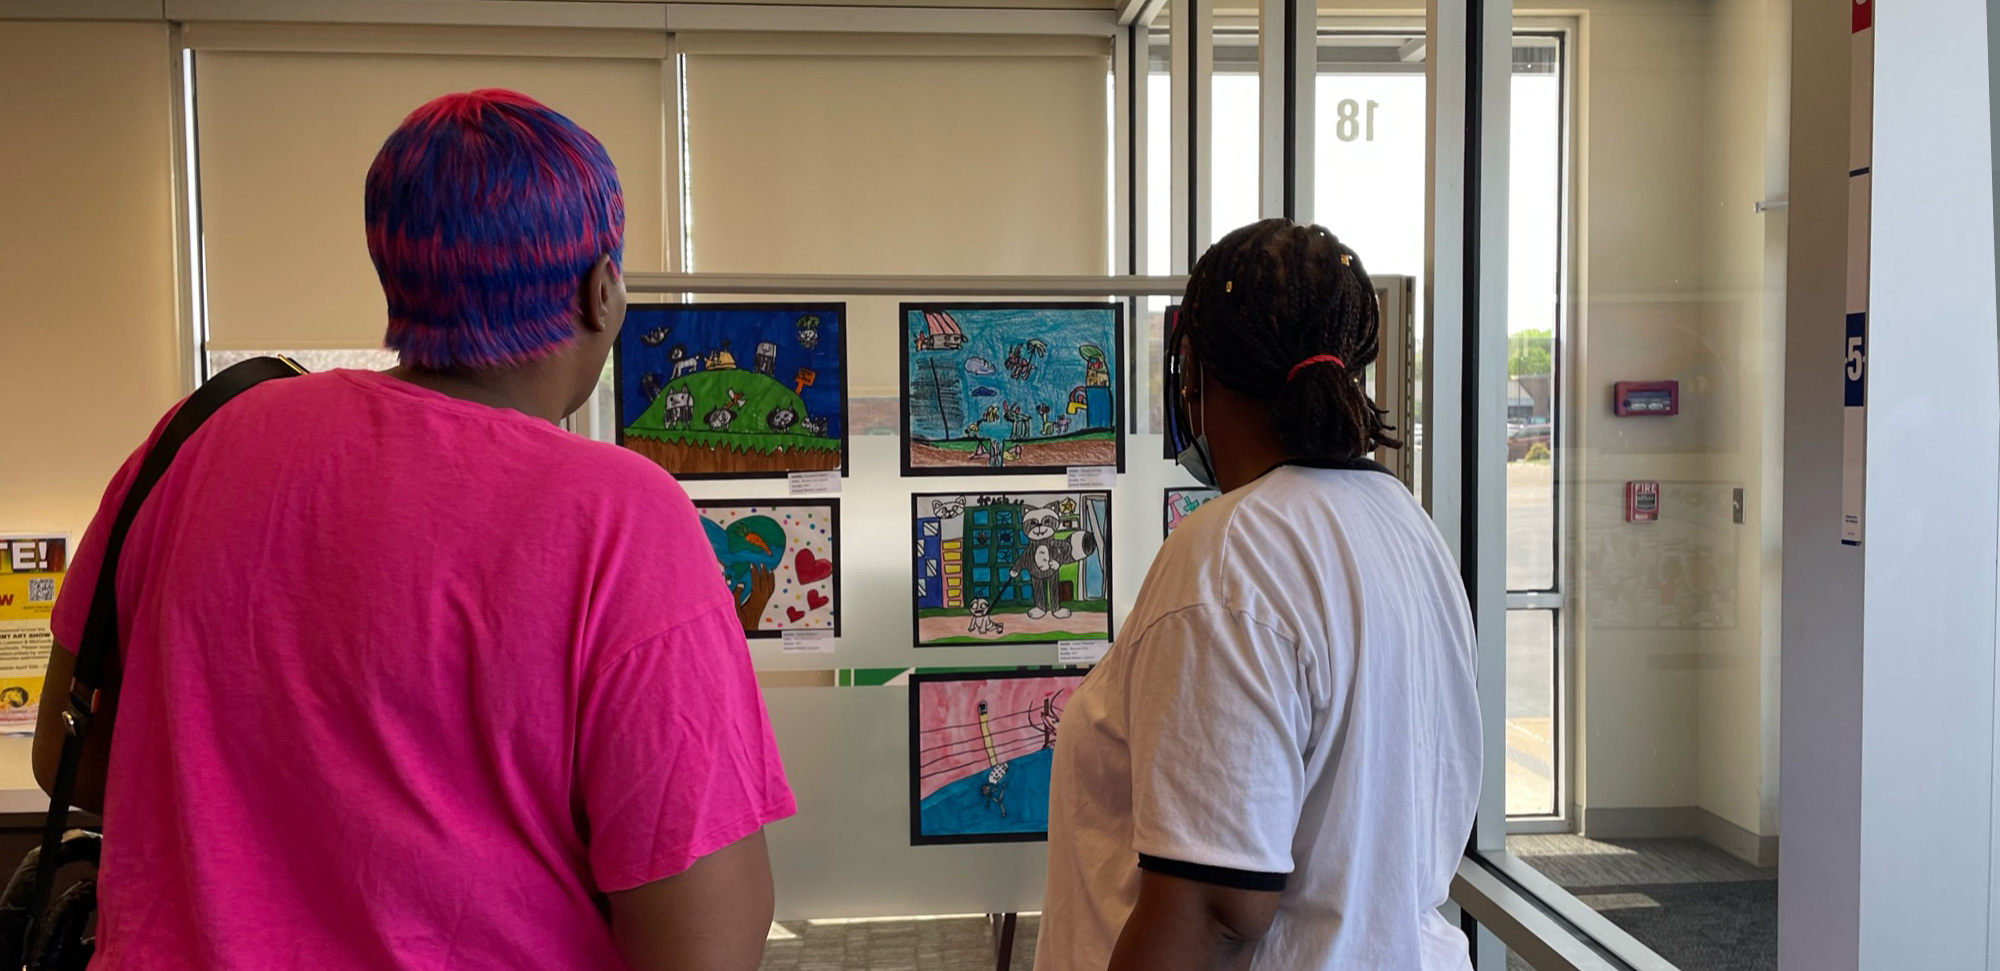 West Community Credit Union Hosts 3rd Annual Art Contest for Hazelwood School District